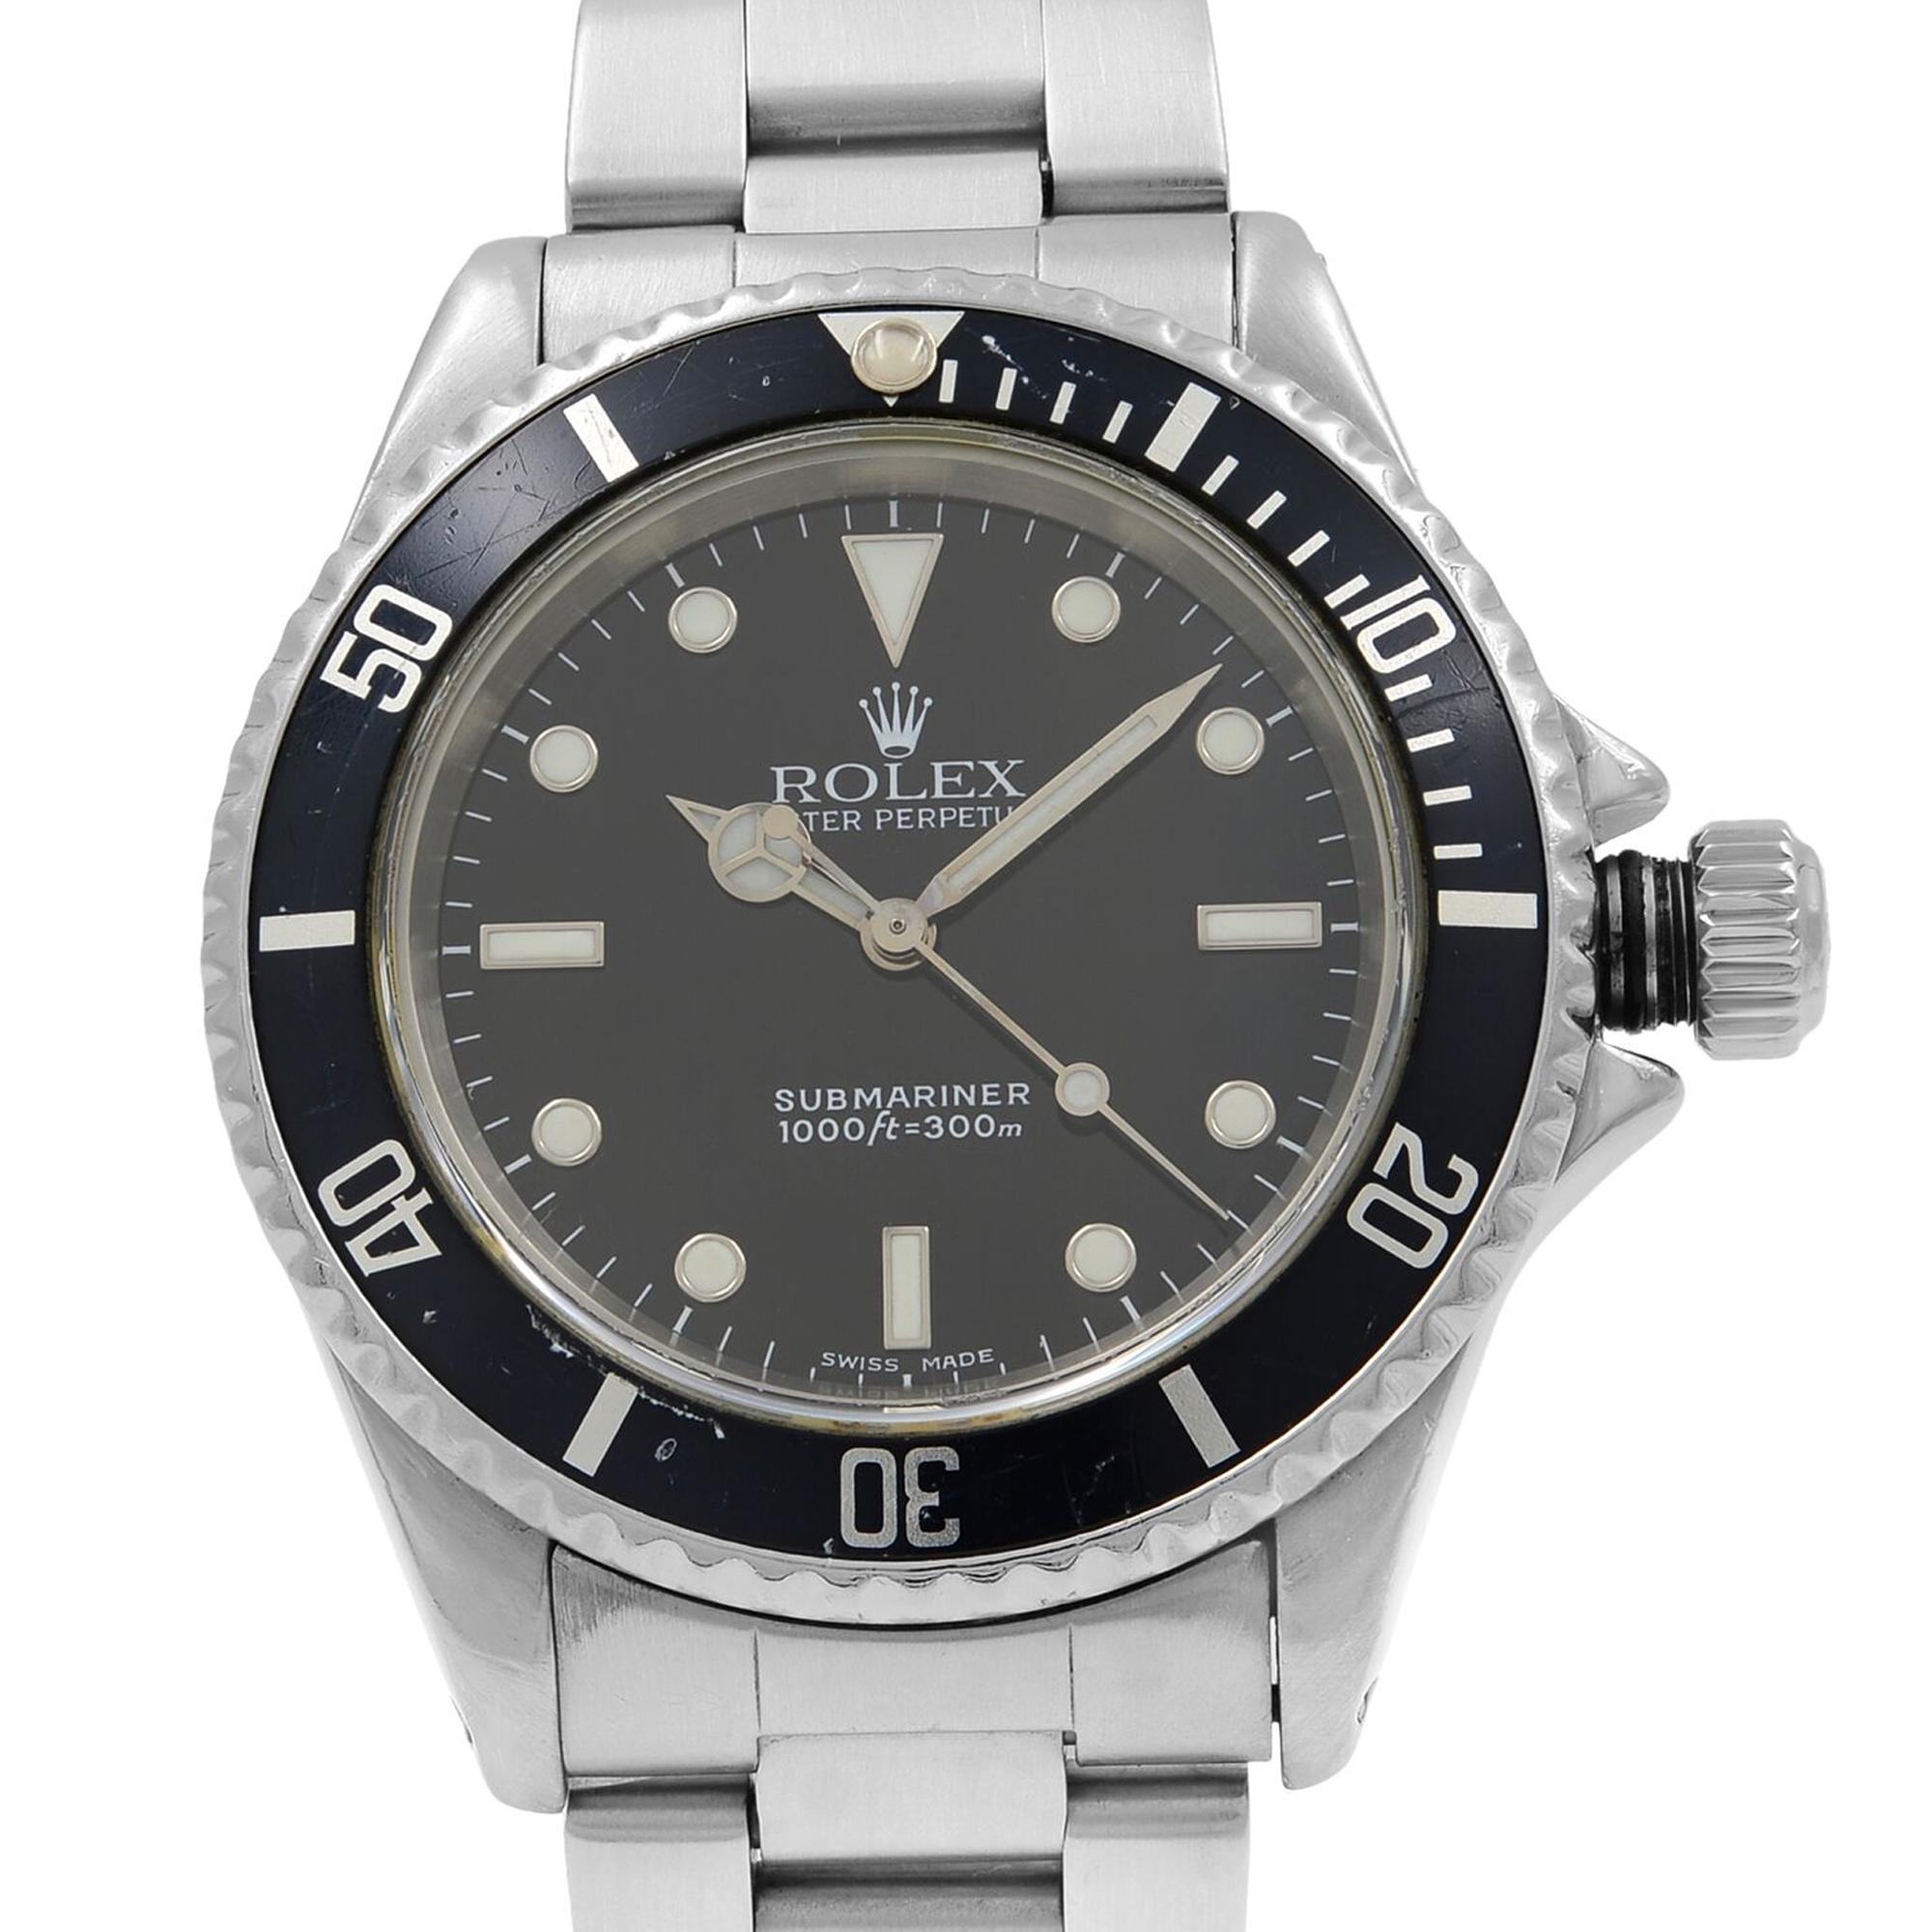 This pre-owned Rolex Submariner  14060M is a beautiful men's timepiece that is powered by a mechanical (automatic) movement which is cased in a stainless steel case. It has a round shape face, no features dial, and has hand sticks & dots style